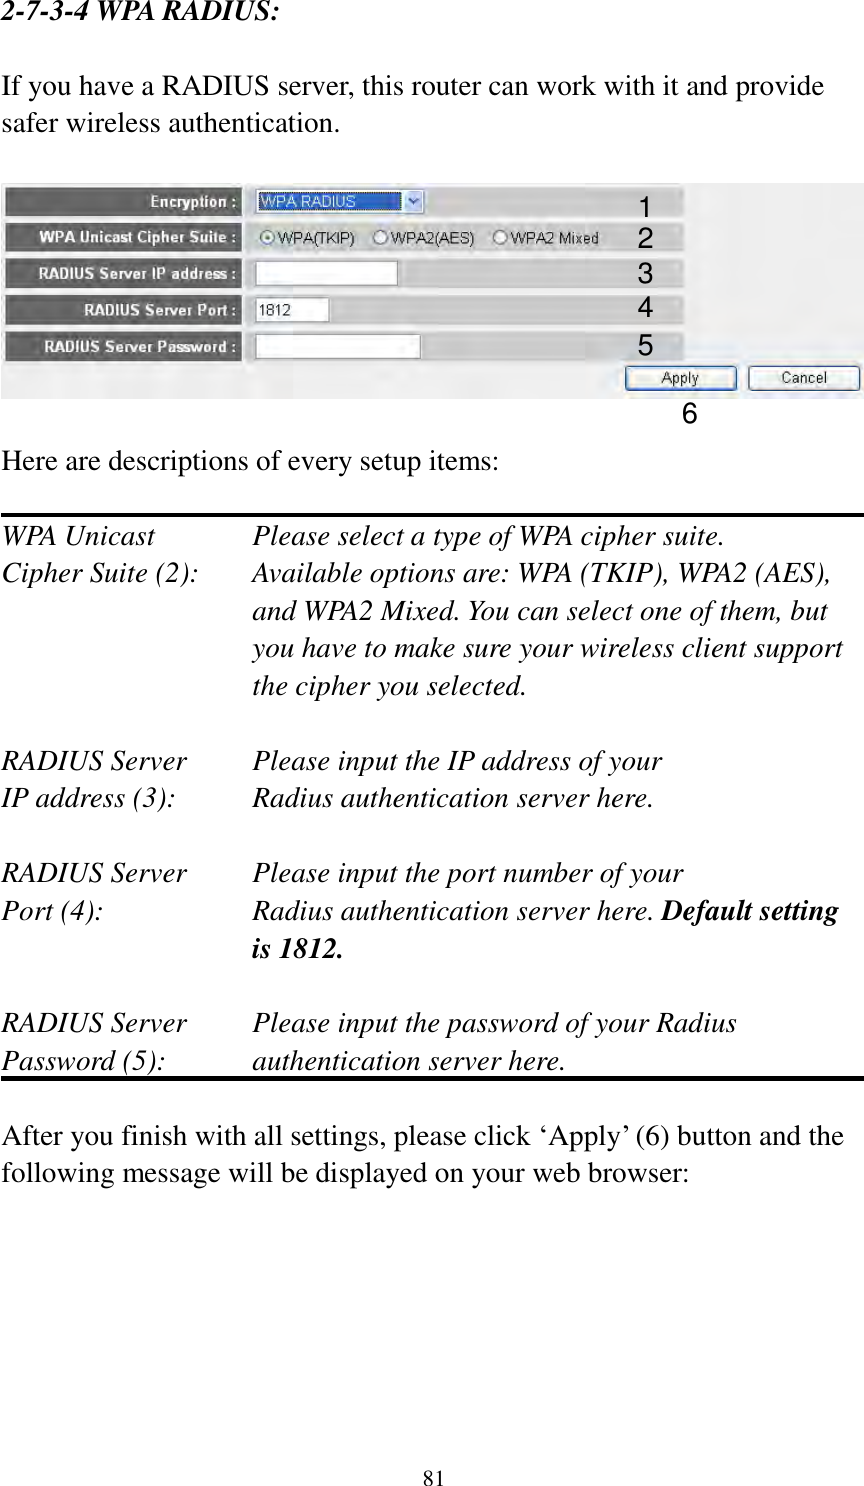 81 2-7-3-4 WPA RADIUS:  If you have a RADIUS server, this router can work with it and provide safer wireless authentication.    Here are descriptions of every setup items:  WPA Unicast      Please select a type of WPA cipher suite. Cipher Suite (2):  Available options are: WPA (TKIP), WPA2 (AES), and WPA2 Mixed. You can select one of them, but you have to make sure your wireless client support the cipher you selected.  RADIUS Server     Please input the IP address of your IP address (3):     Radius authentication server here.  RADIUS Server     Please input the port number of your Port (4):    Radius authentication server here. Default setting is 1812.  RADIUS Server     Please input the password of your Radius Password (5):    authentication server here.  After you finish with all settings, please click „Apply‟ (6) button and the following message will be displayed on your web browser:  1 3 4 2 5 6 